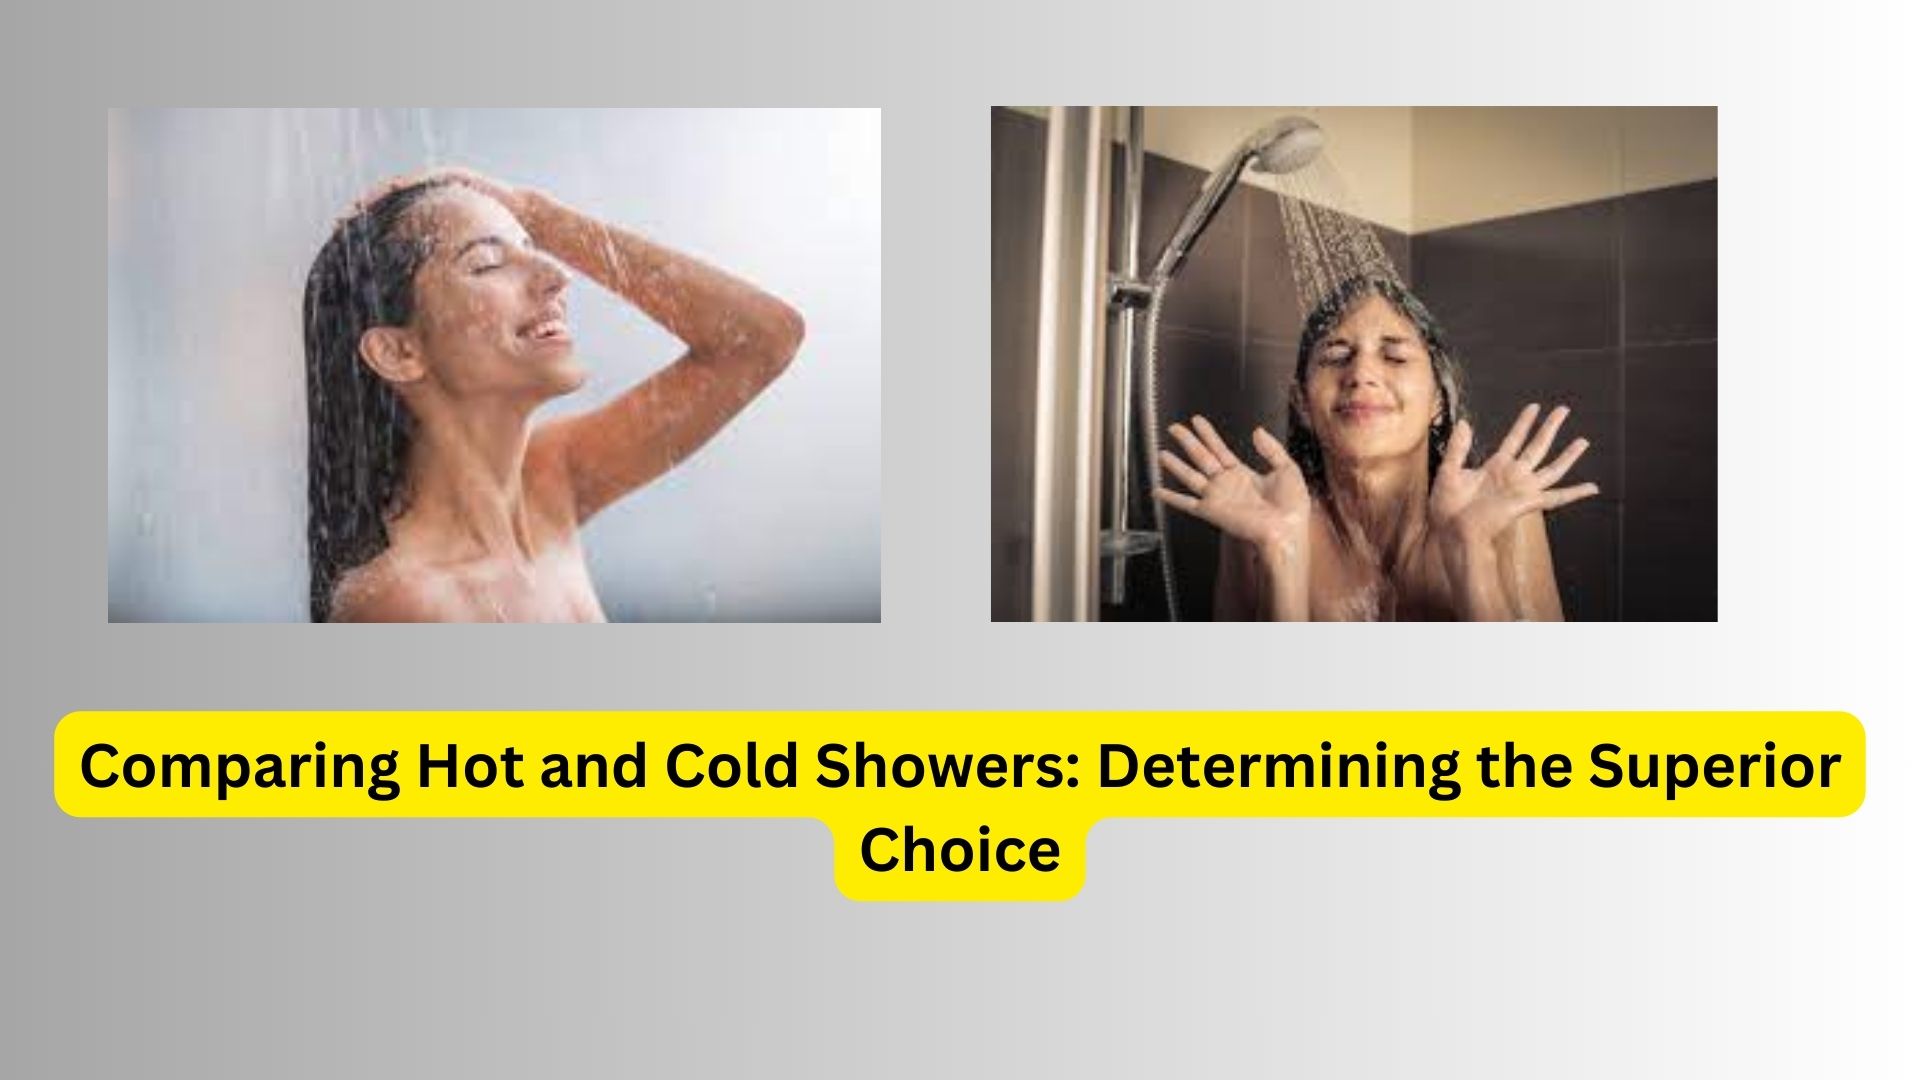 Comparing Hot and Cold Showers: Determining the Superior Choice